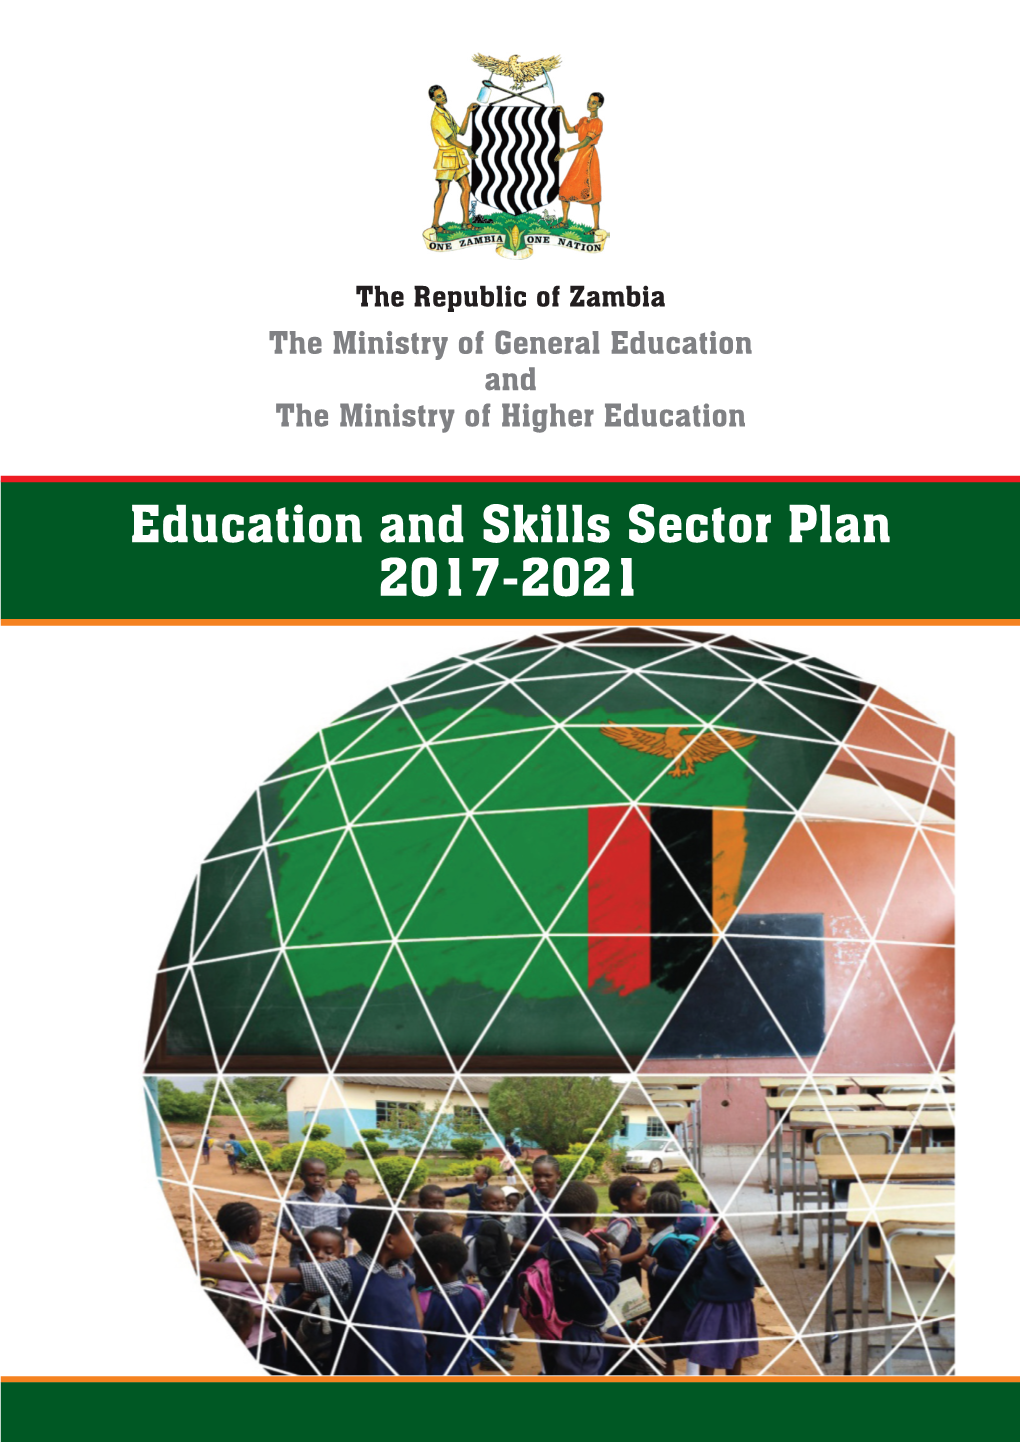 Education and Skills Sector Plan 2017-2021